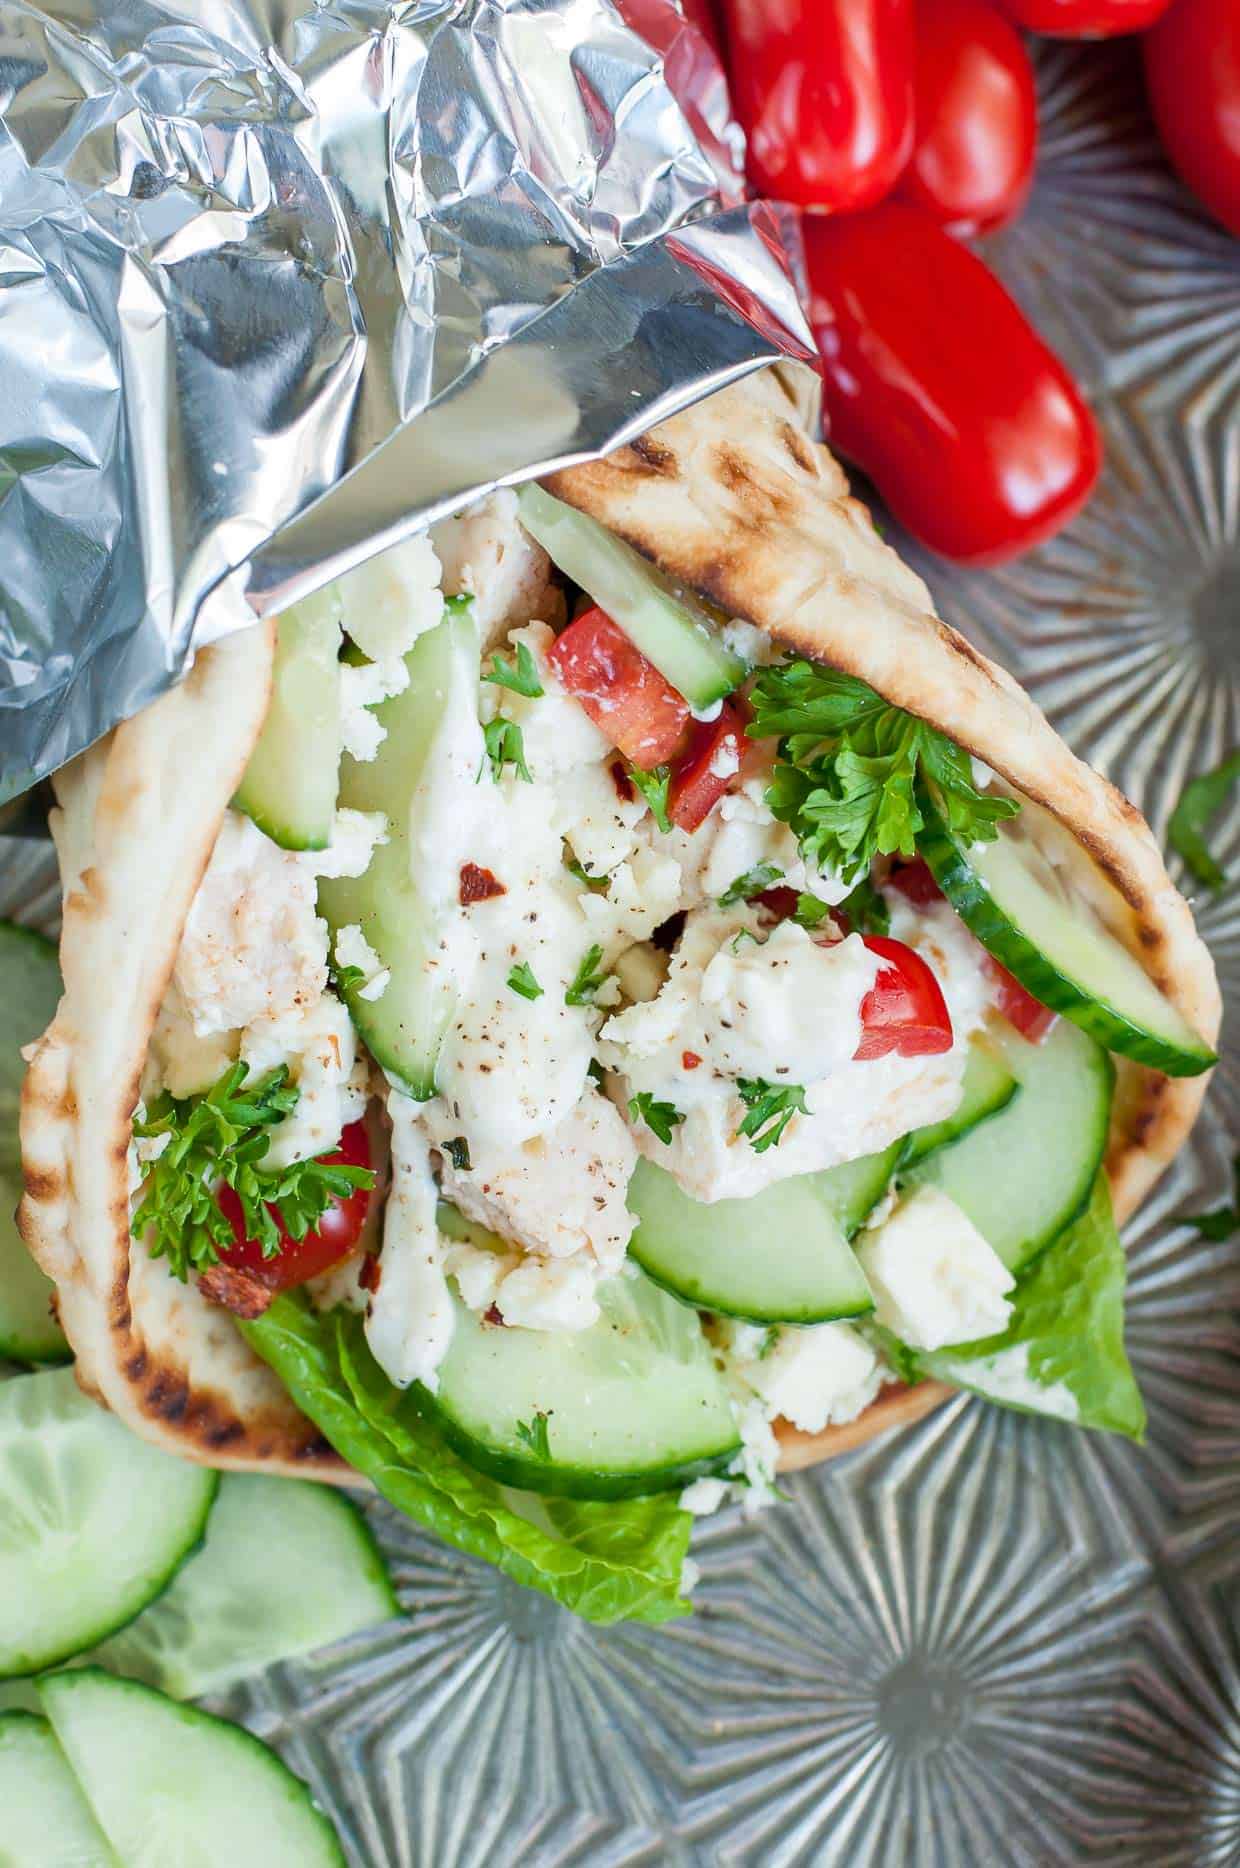 25 Mediterranean Recipes for Your Party | The Mediterranean Dish